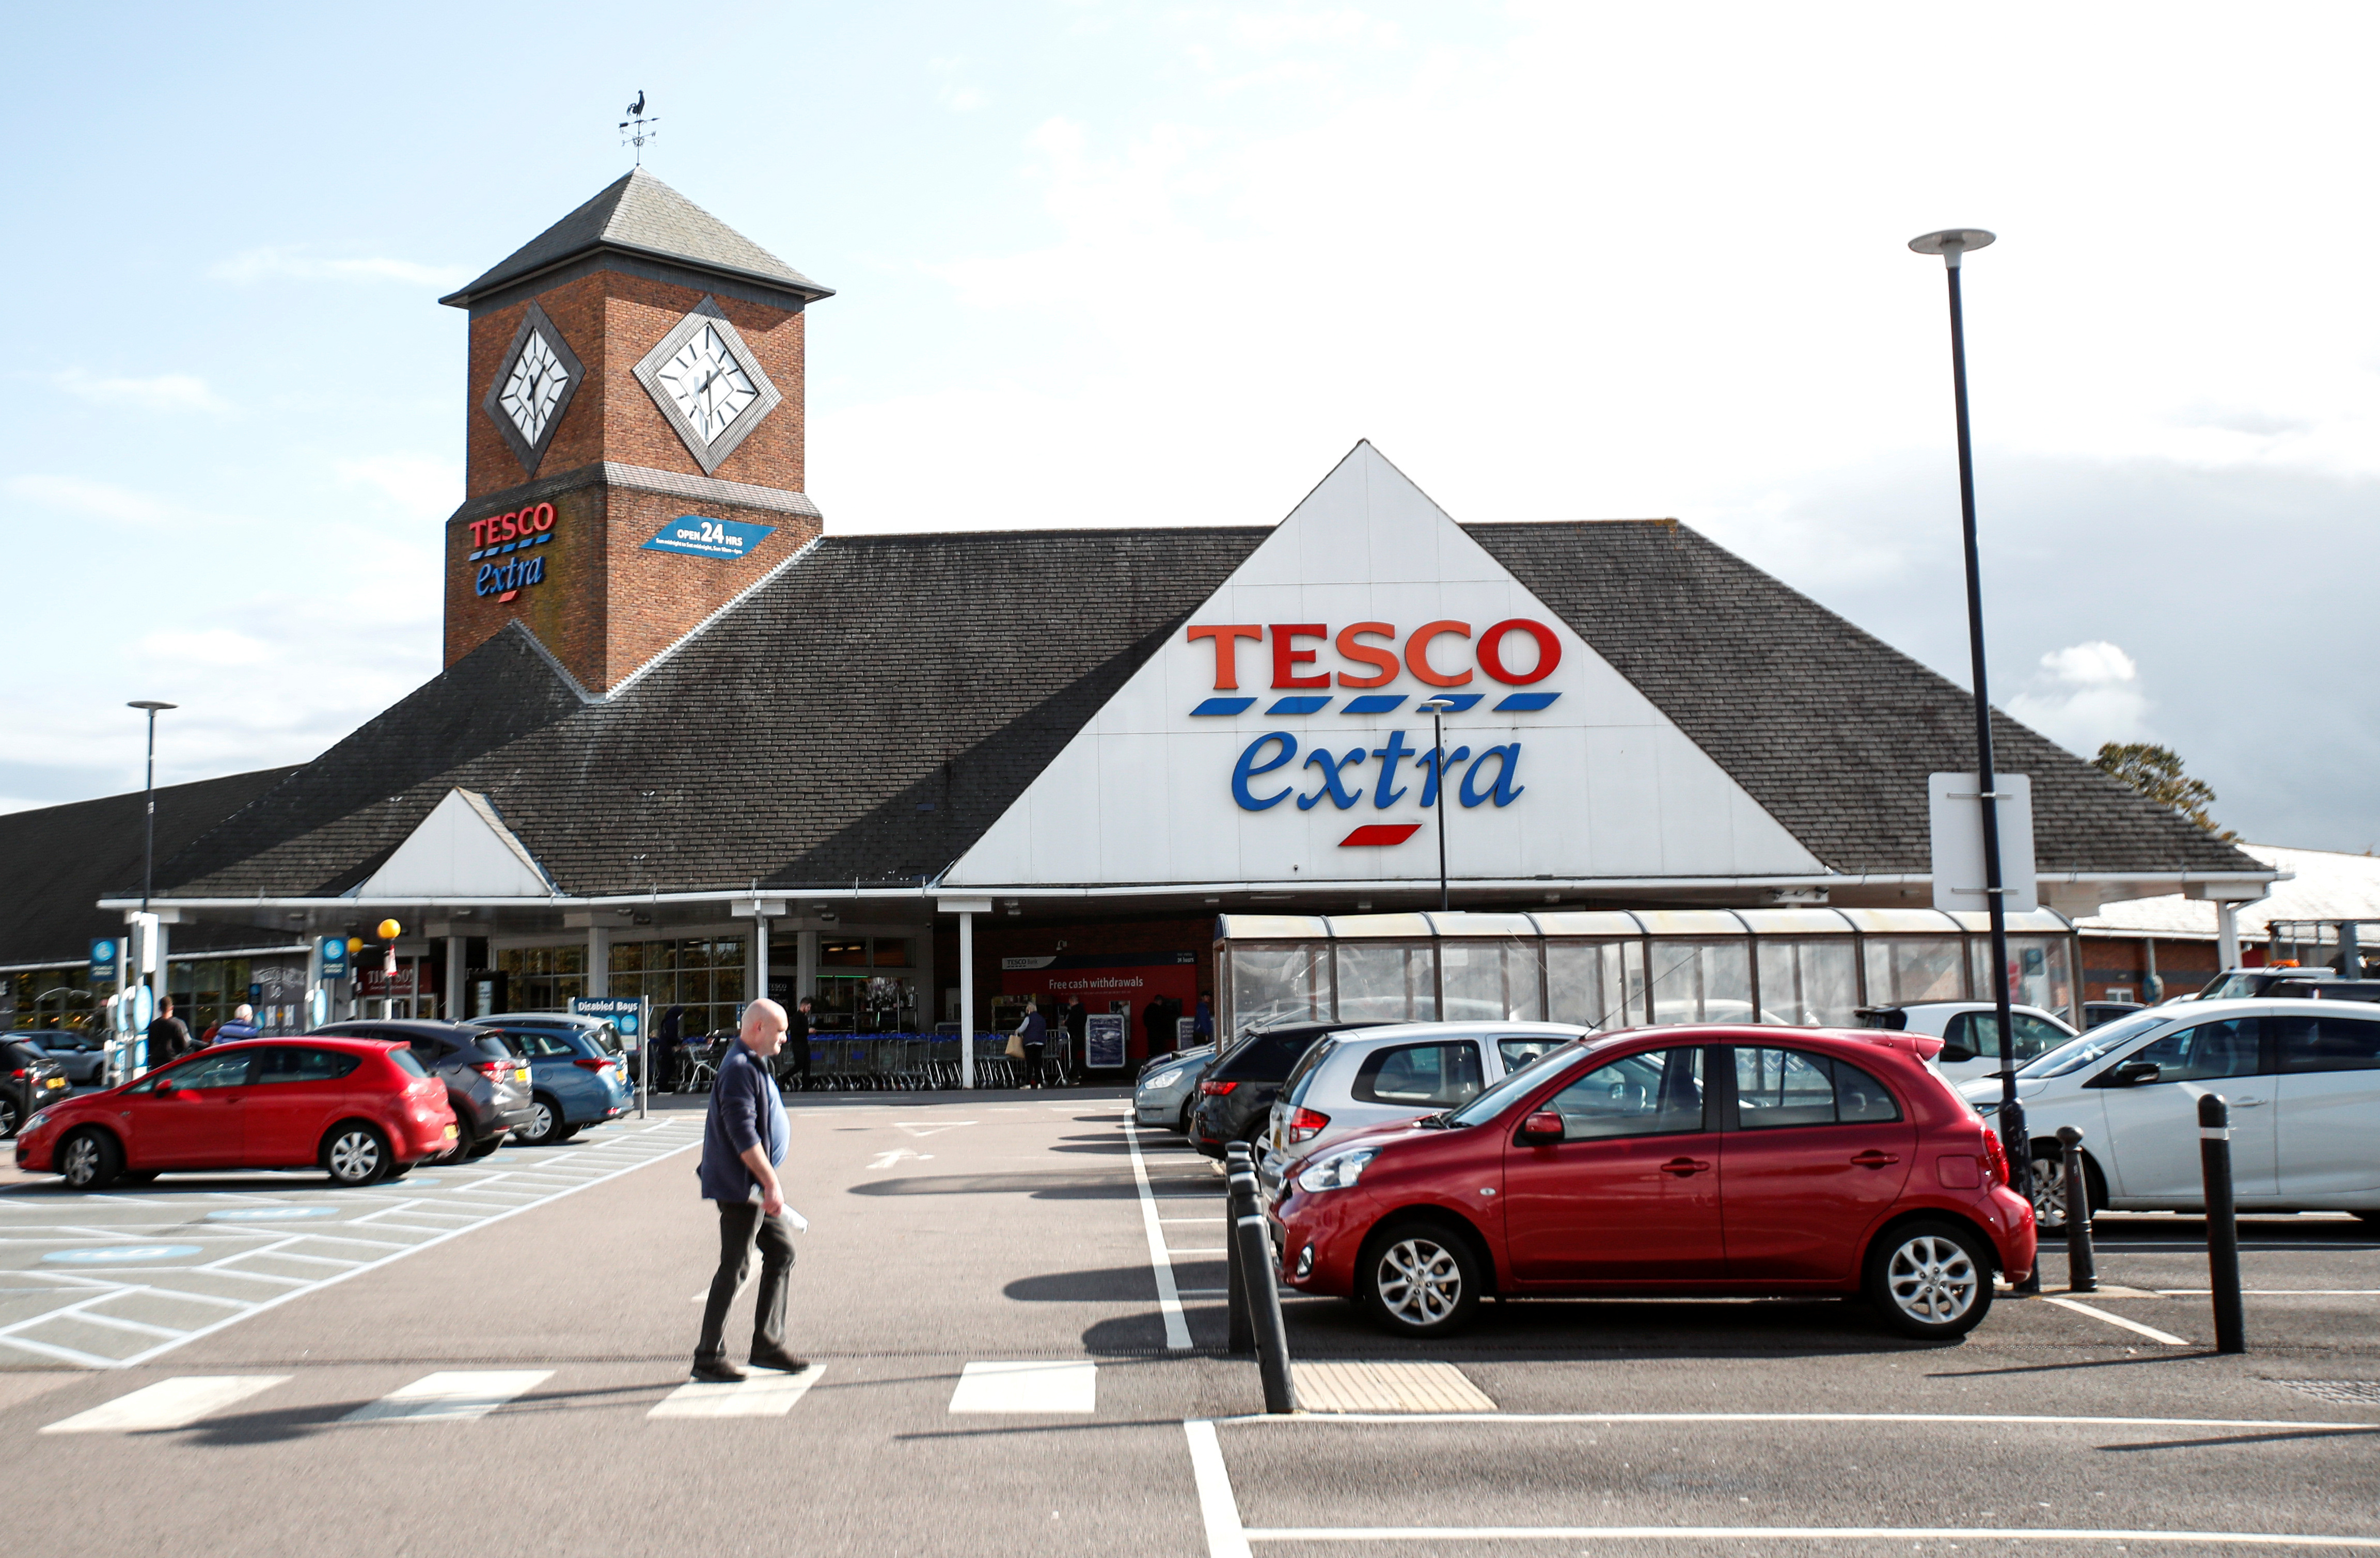 A general view shows a Tesco supermarket in Hatfield